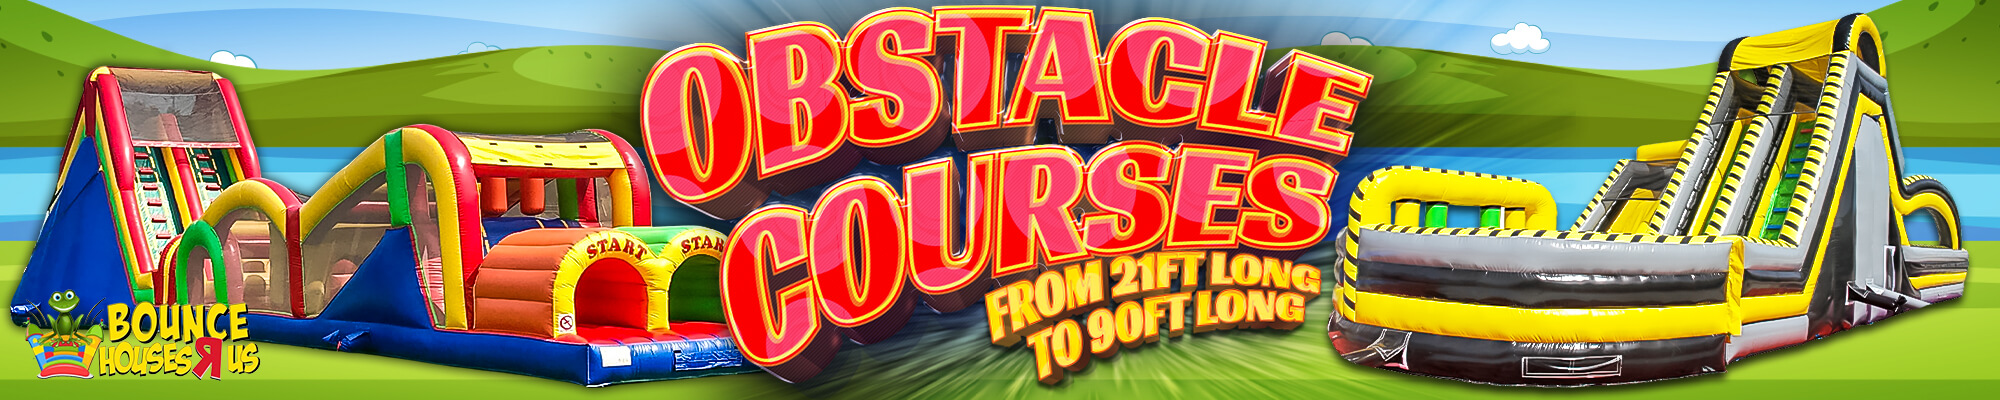 Chicago Blow up Obstacle Course Rentals